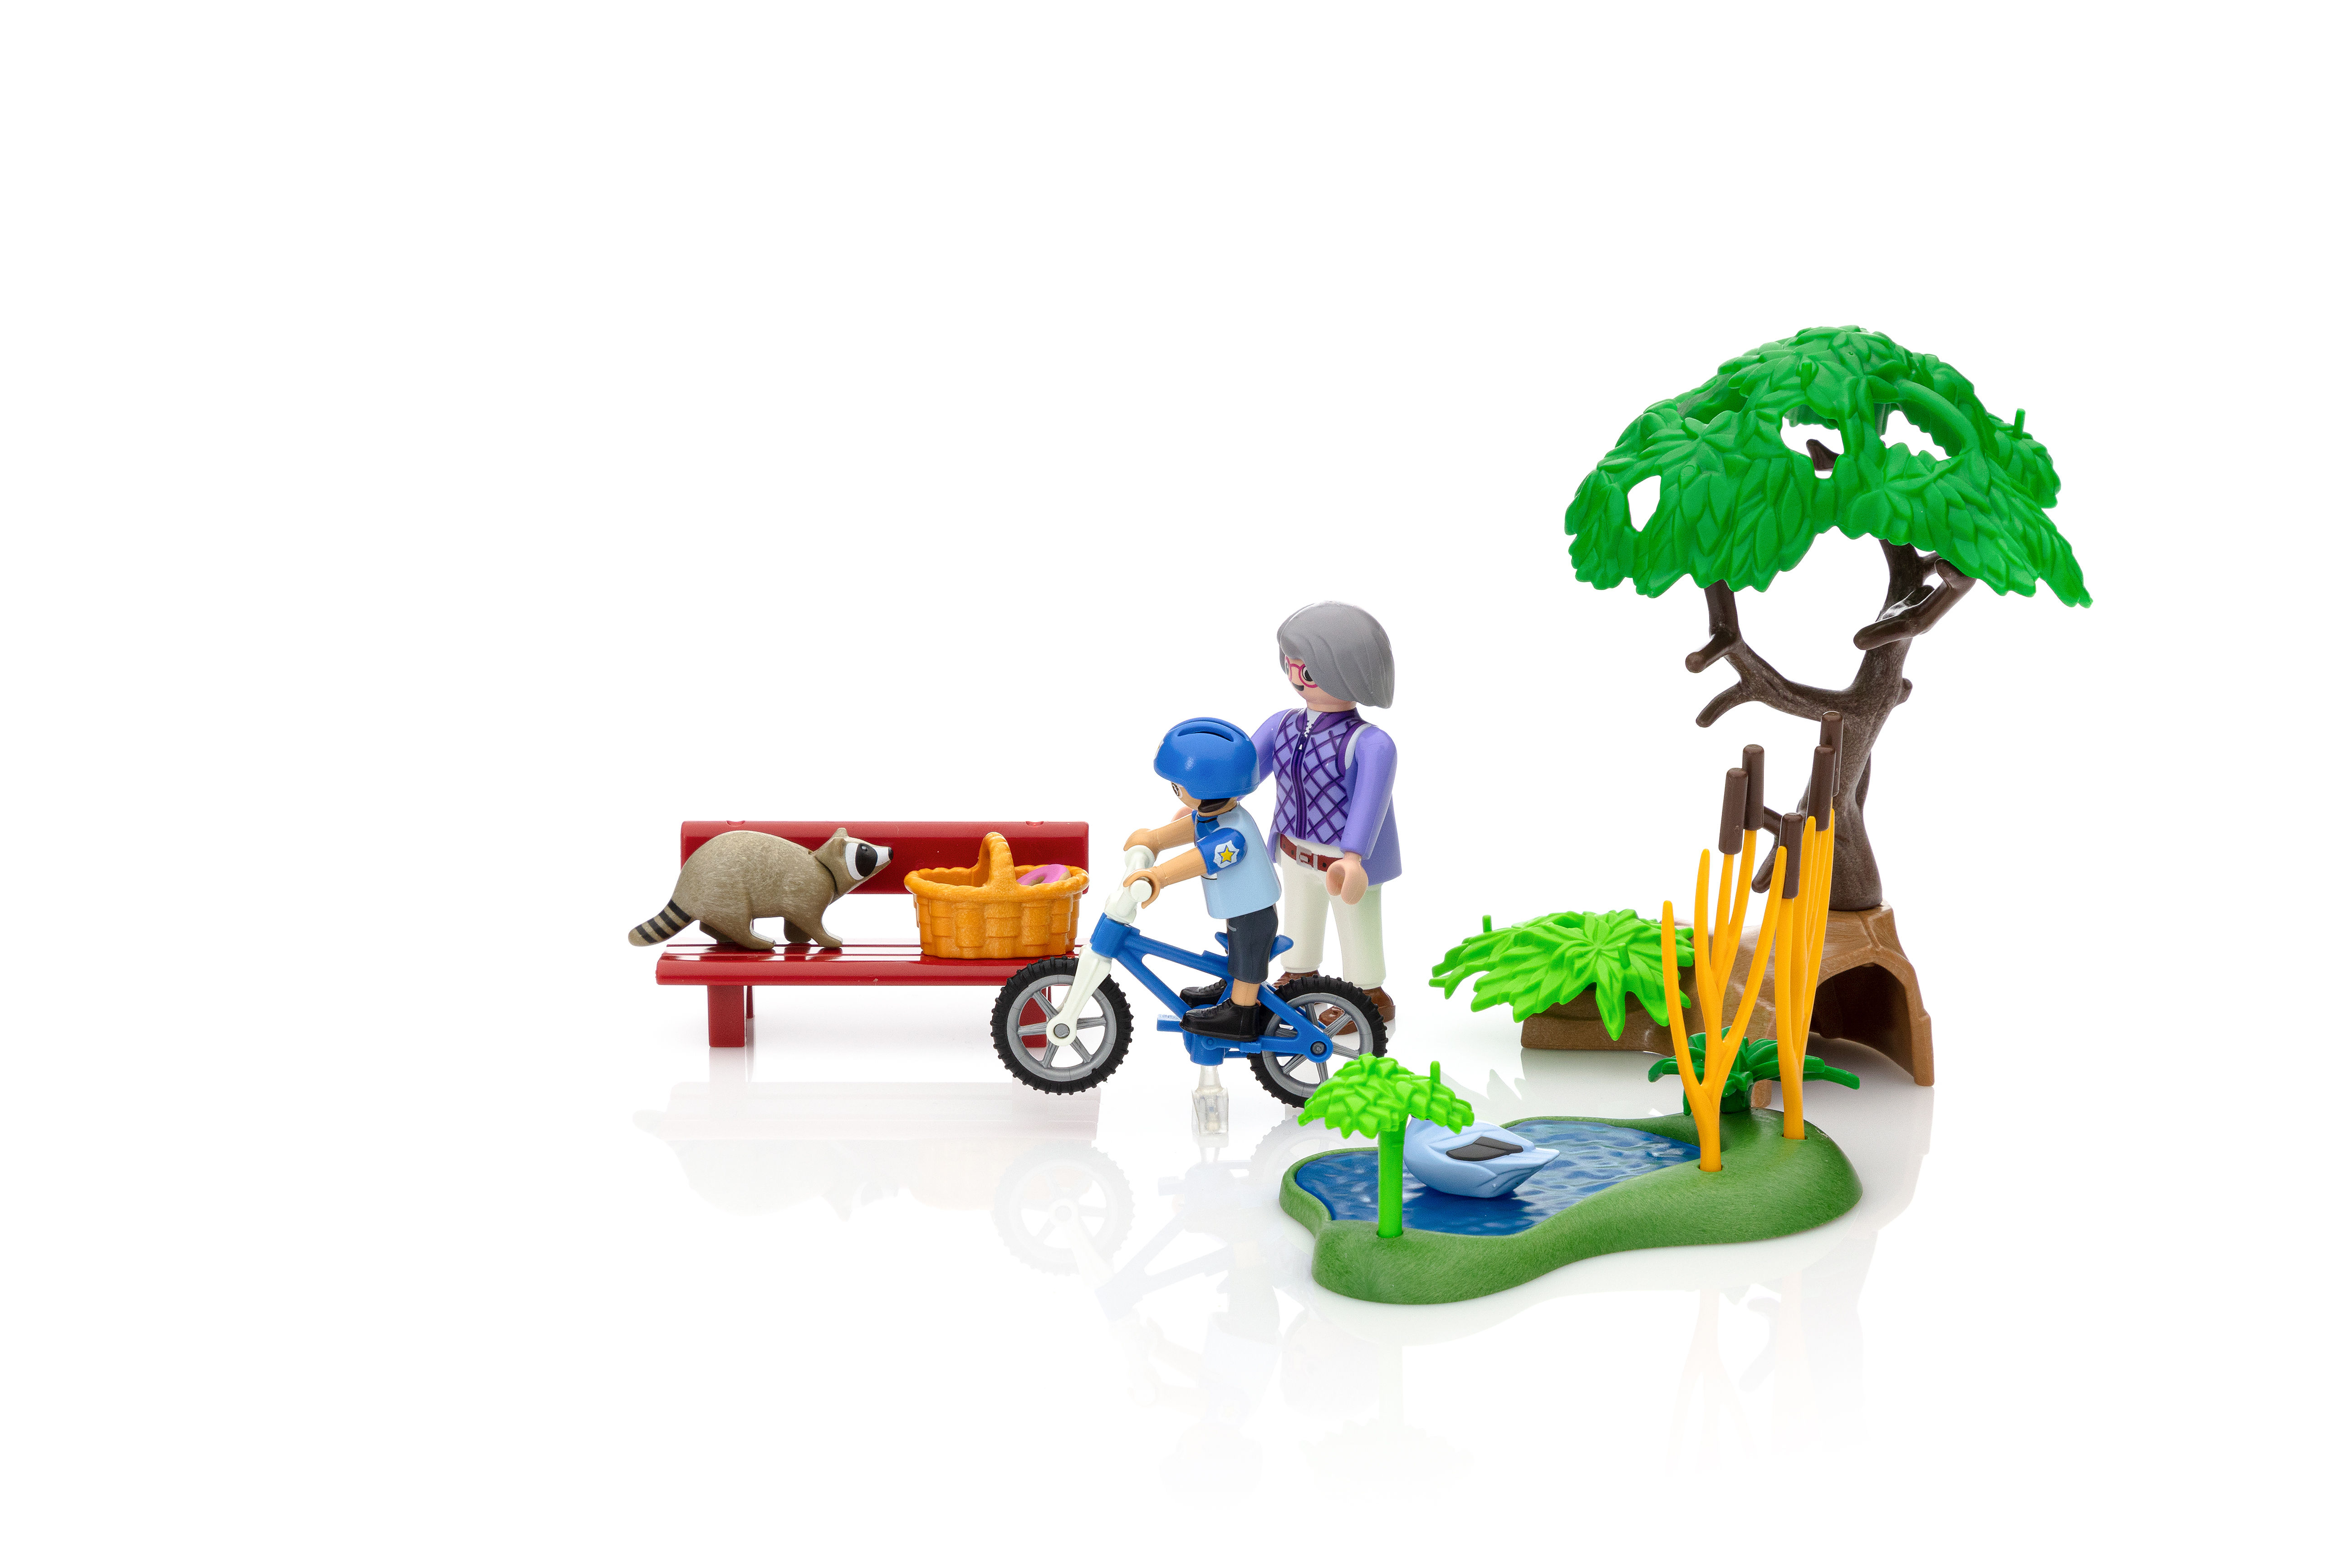 Playmobil - Turn the crank and watch the water flow! Grab your